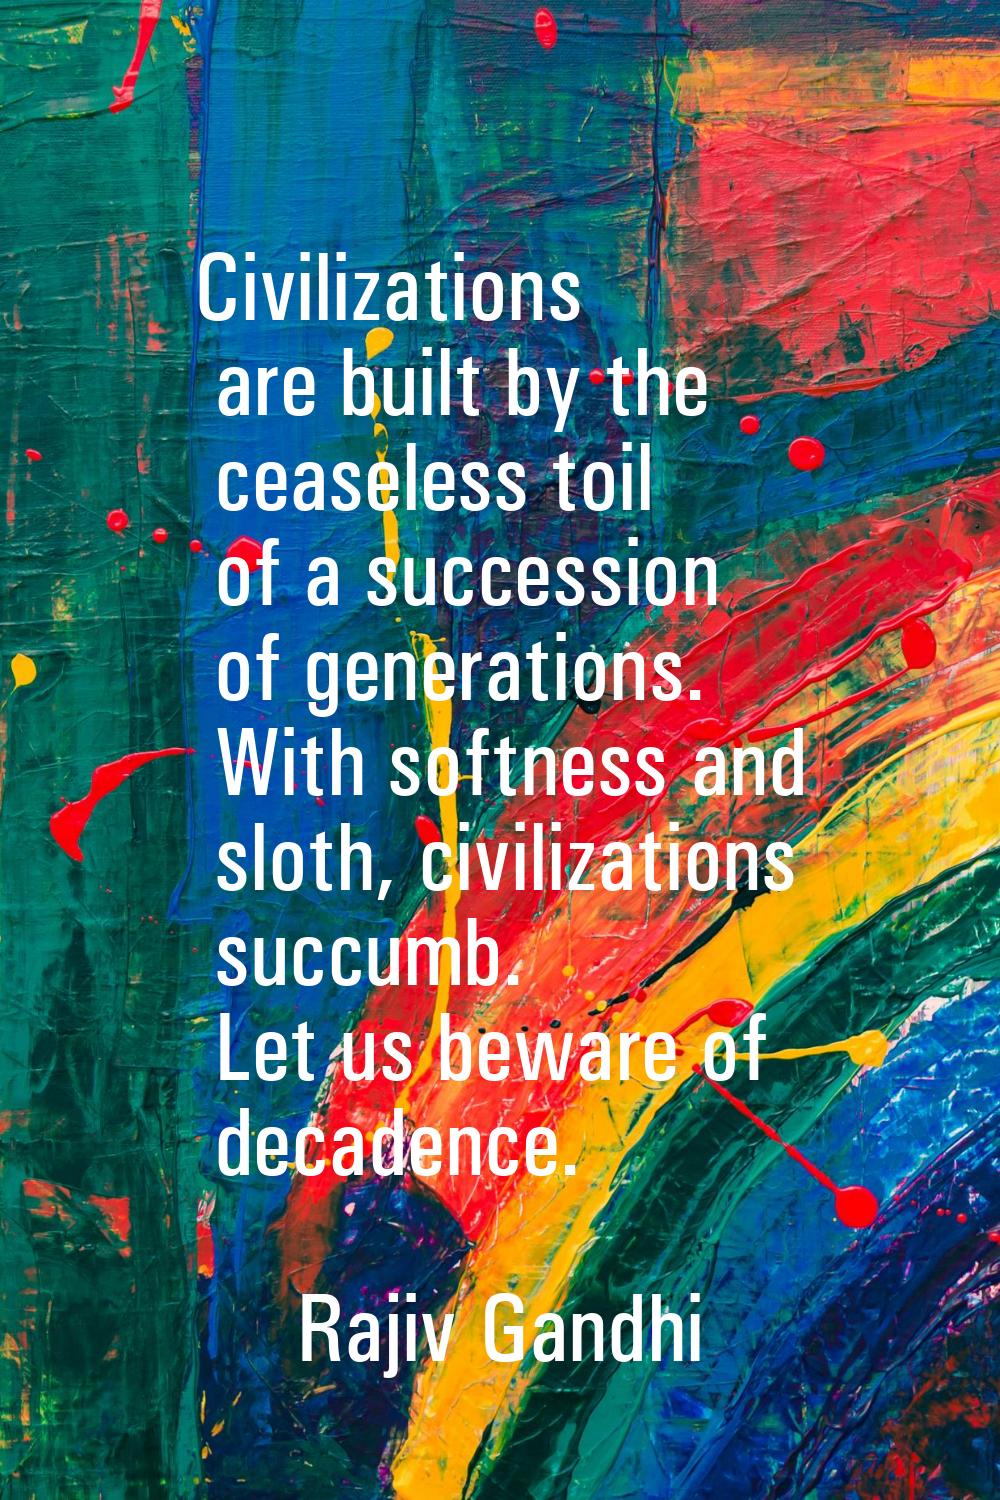 Civilizations are built by the ceaseless toil of a succession of generations. With softness and slo